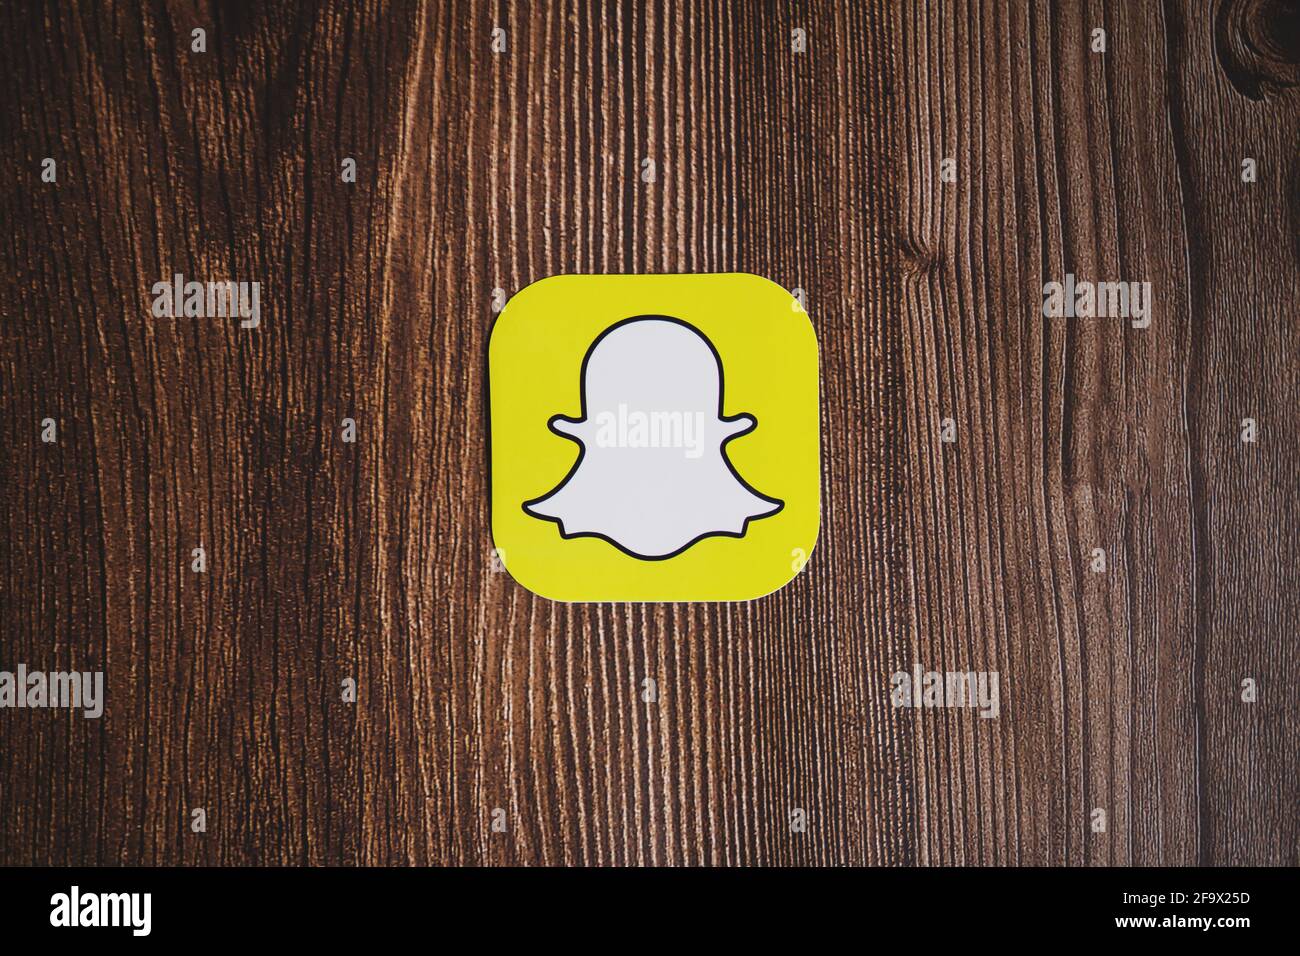 SWANSEA, UK - MARCH 12, 2021: Snapchat yellow logo printed on paper centrally placed on wooden background Stock Photo